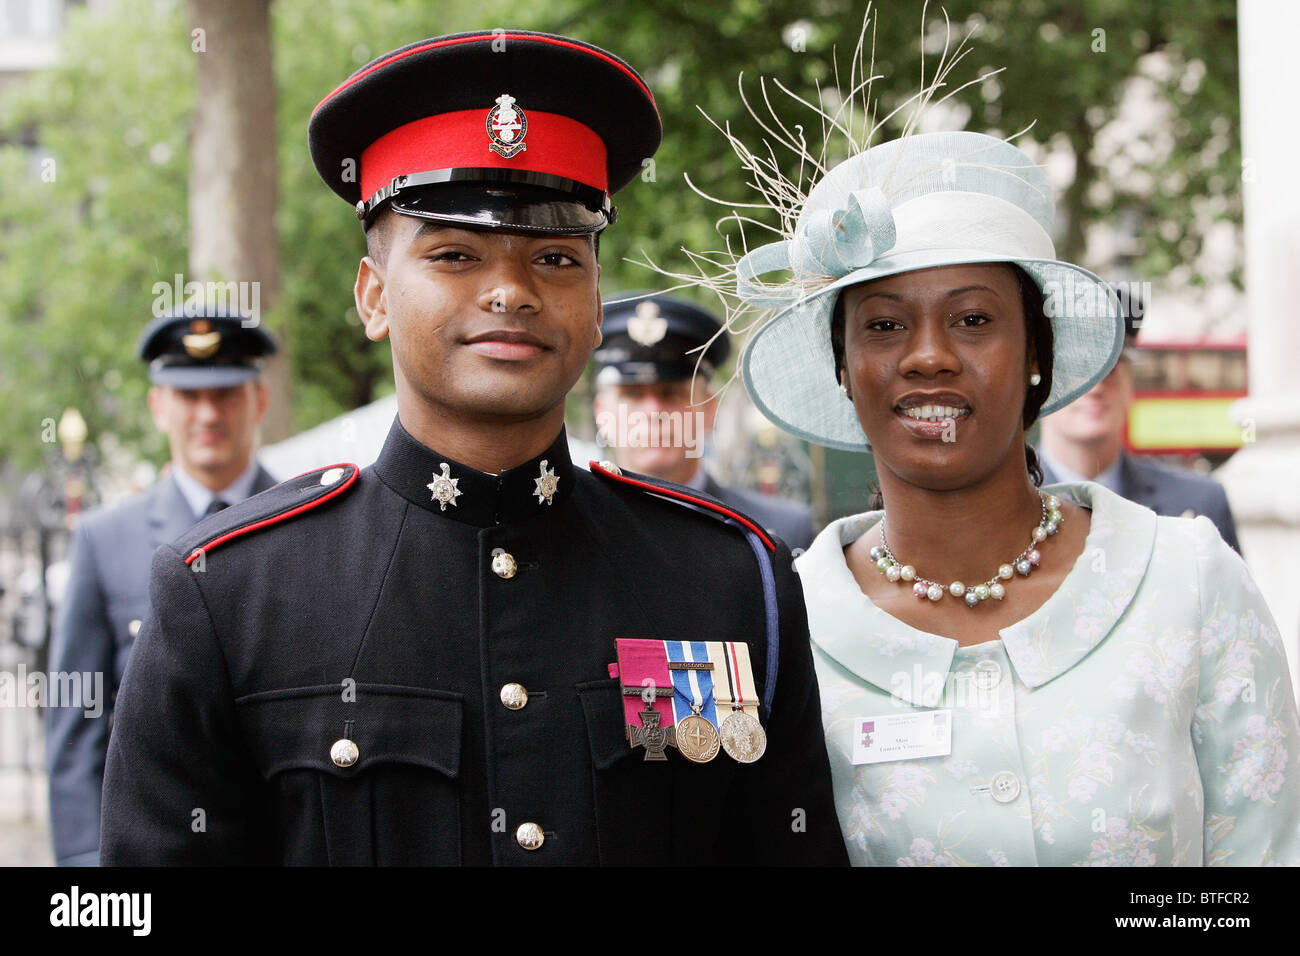 Private Johnson Beharry with Victoria Cross VC medal for bravery acompanied by his partner at Westminster Abbey, London Stock Photo